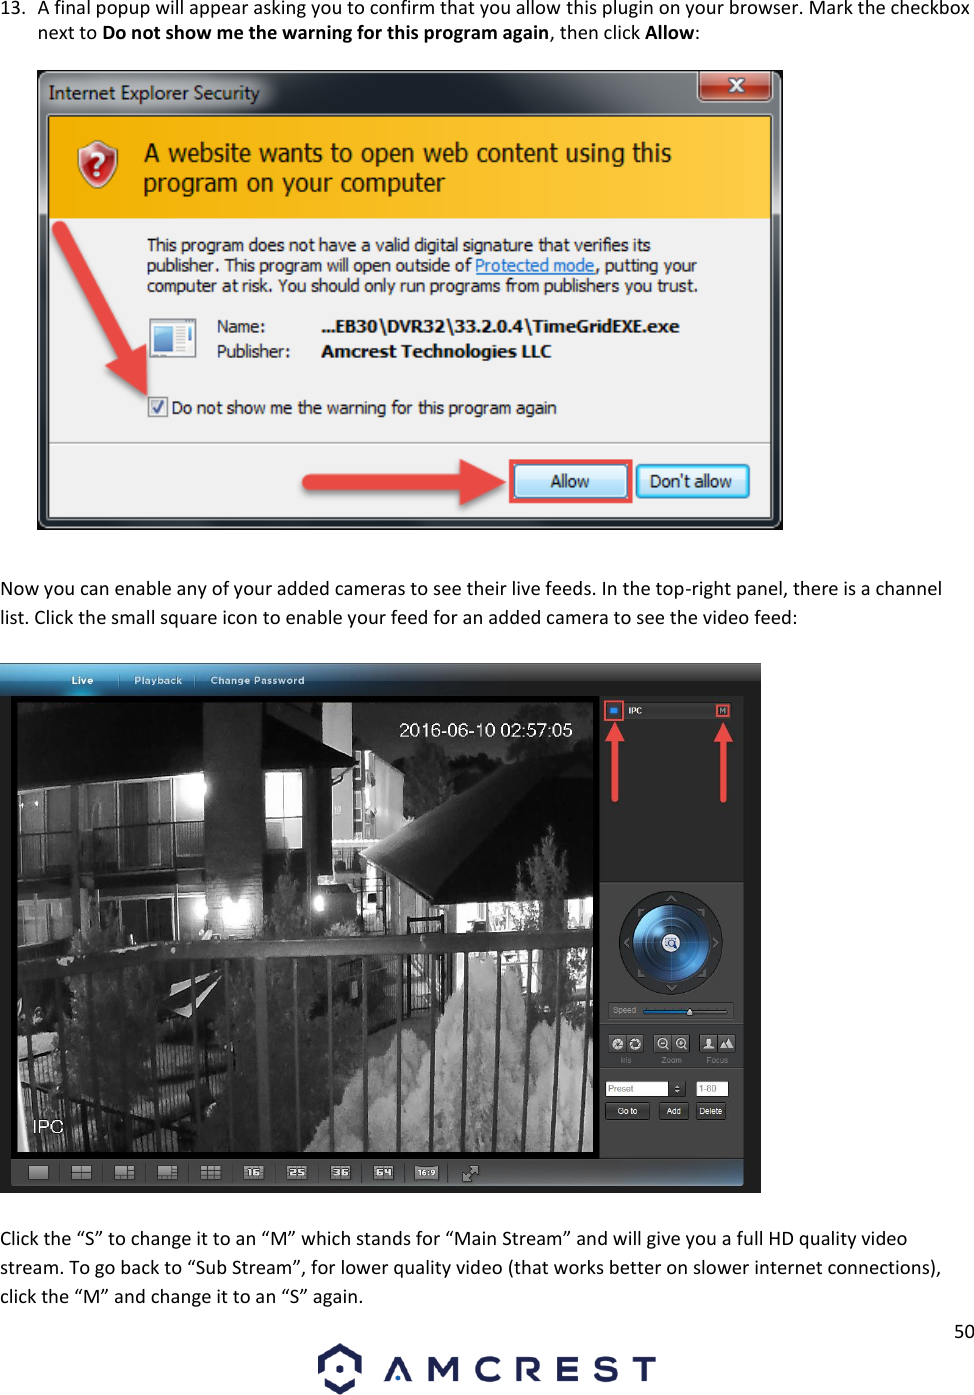 50   13. A final popup will appear asking you to confirm that you allow this plugin on your browser. Mark the checkbox next to Do not show me the warning for this program again, then click Allow:     Now you can enable any of your added cameras to see their live feeds. In the top-right panel, there is a channel list. Click the small square icon to enable your feed for an added camera to see the video feed:    Click the “S” to change it to an “M” which stands for “Main Stream” and will give you a full HD quality video stream. To go back to “Sub Stream”, for lower quality video (that works better on slower internet connections), click the “M” and change it to an “S” again.   